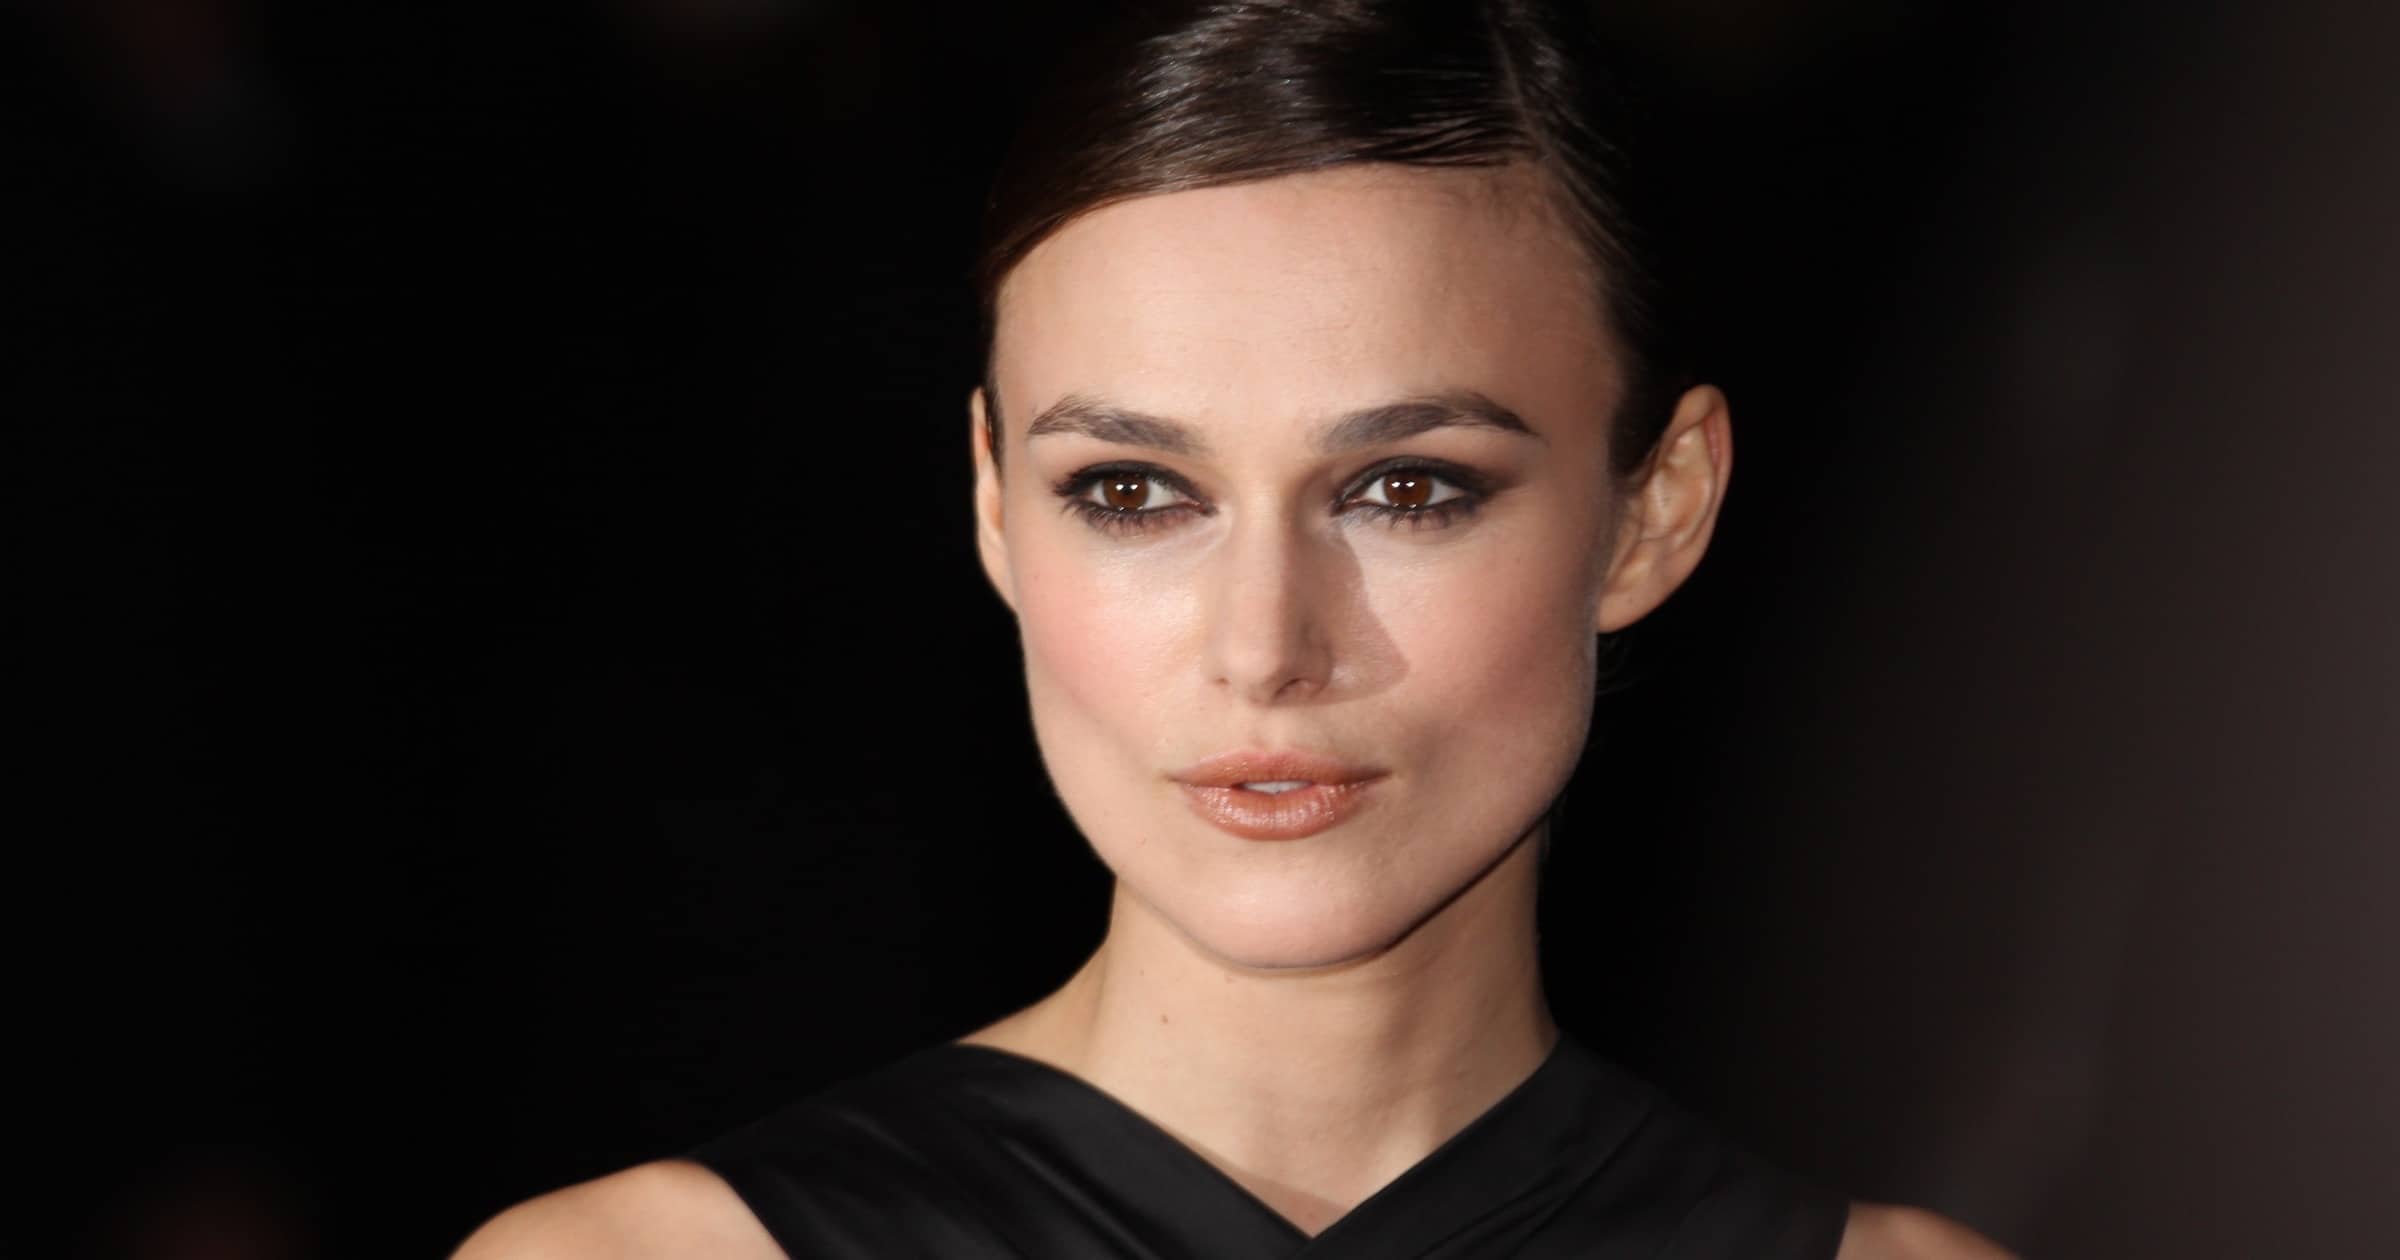 Keira Knightley Exits ‘The Essex Serpent’ on Apple TV+